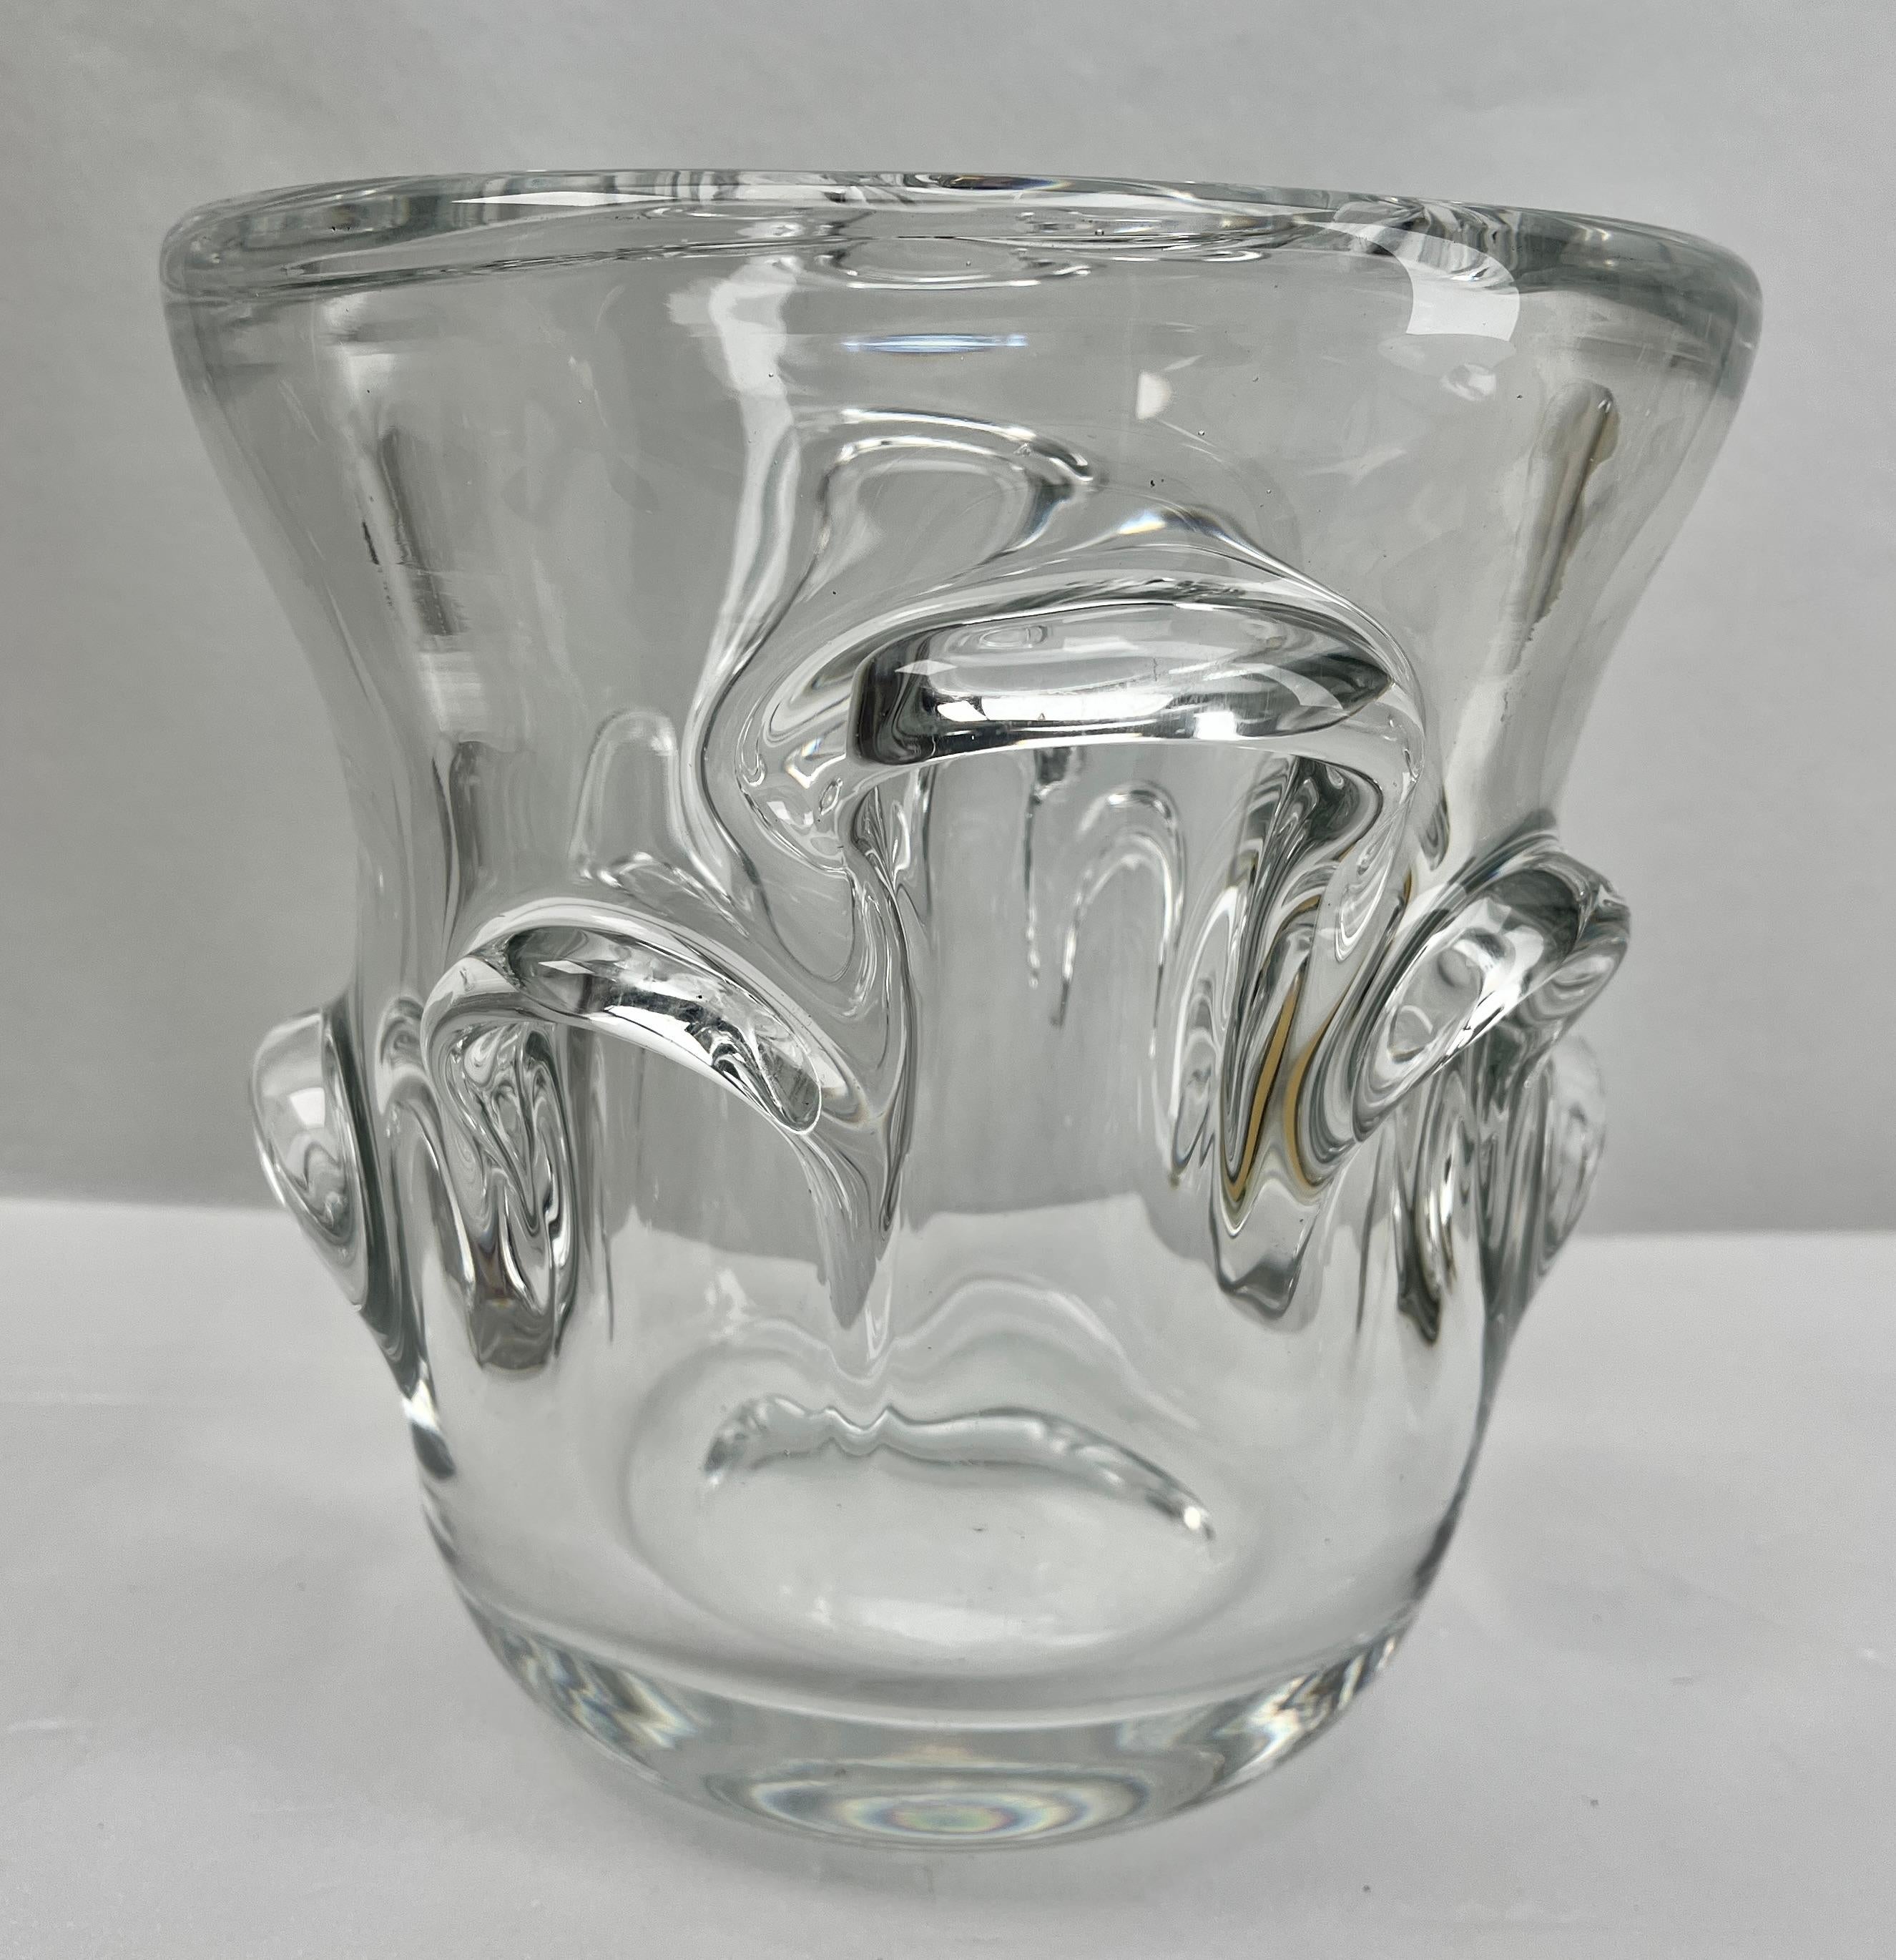 Val Saint Lambert Large Clear Crystal Champagne Wine Bucket Cooler
Large Heavy Val Saint Lambert Crystal Vase. 

Has been given a thick Sommerso clear layer and sculpted with subtle curves by the master craftsmen at Belgium's top factory.
A result